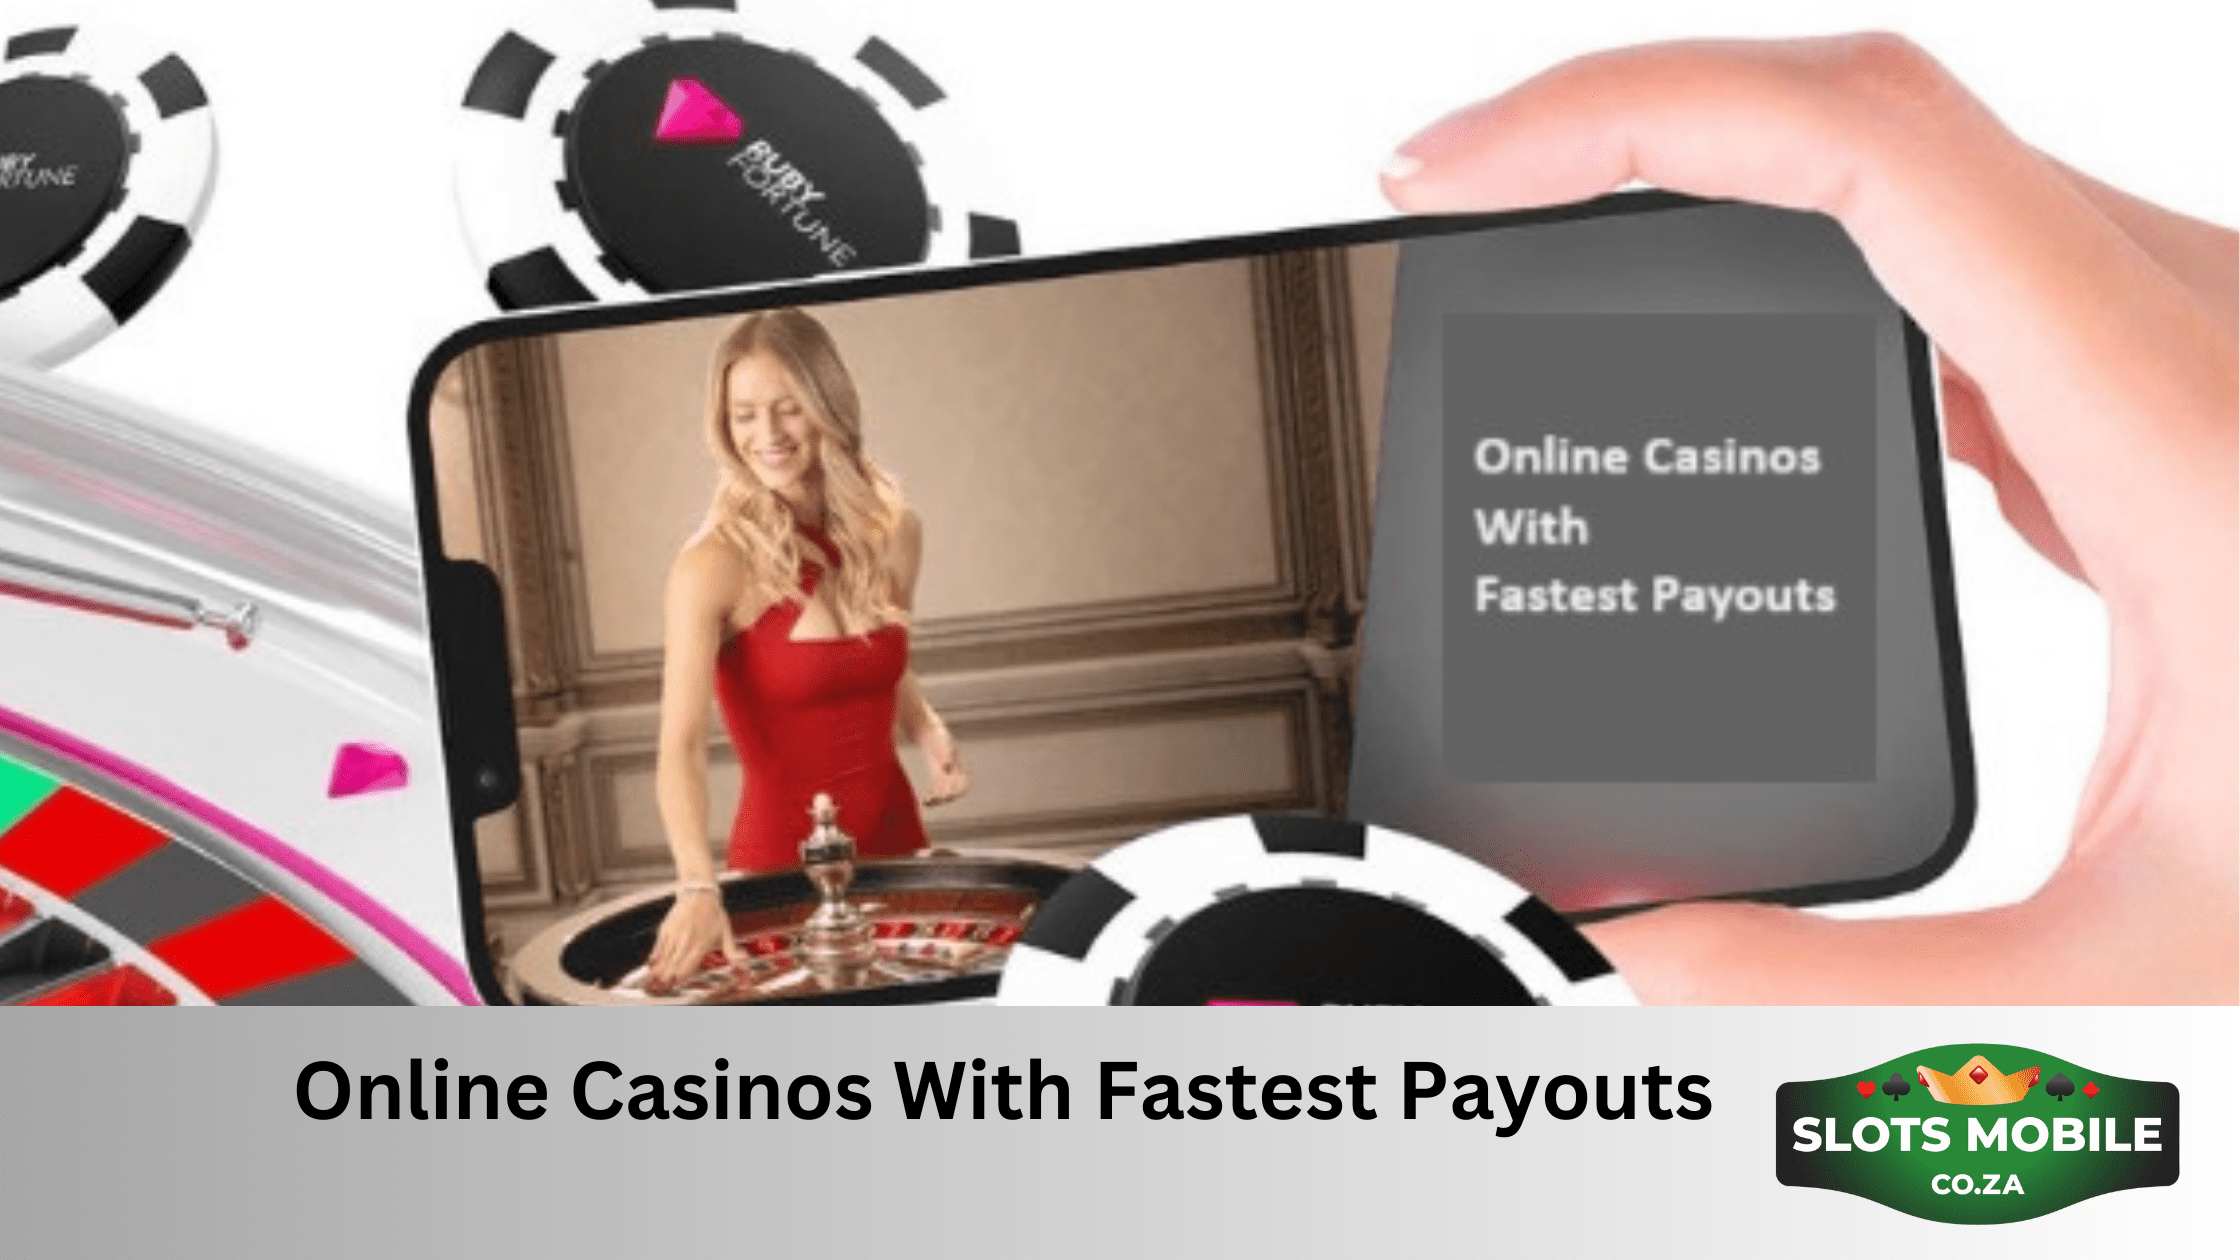 Online Casinos with Fastest Payouts